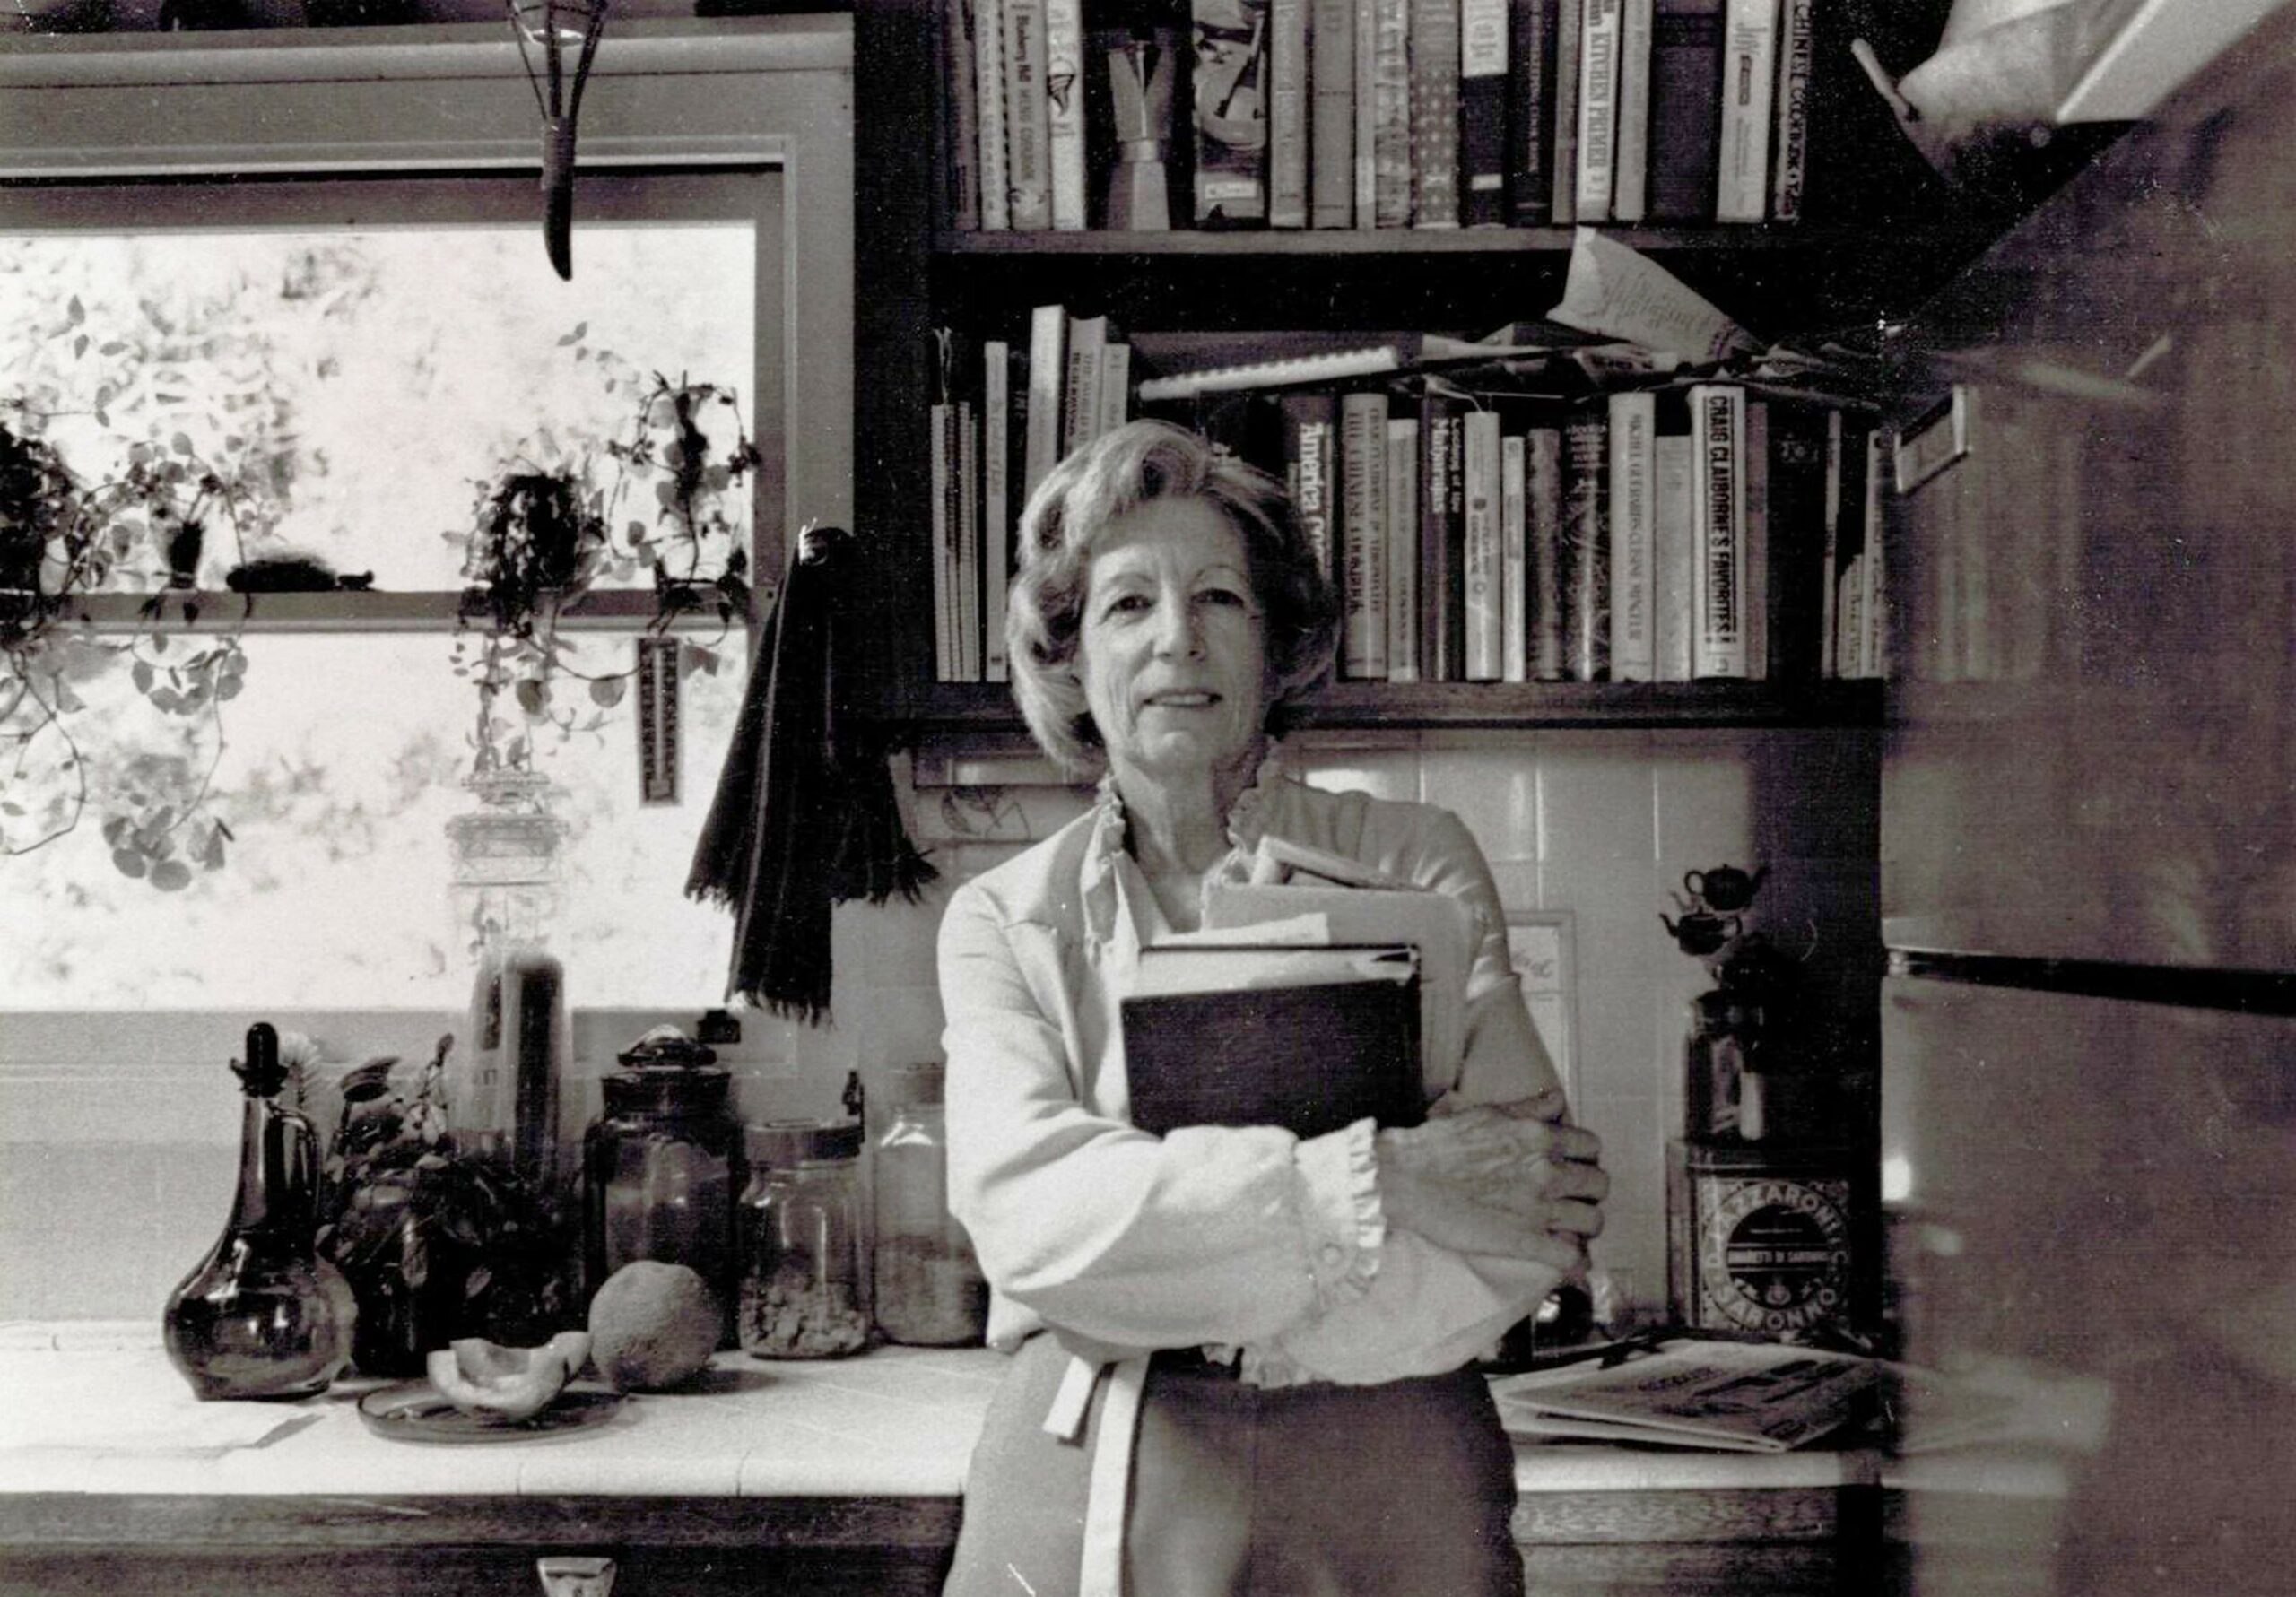 Wine Road founder Millie Howie, pictured at home, originally brought together five founding wineries — Geyser Peak, Foppiano, Trentadue, Simi and Pedroncelli — to form the Russian River Wine Road in 1976. Today, there are 200 wineries along the Wine Road. (Sonoma County Wine Library Collection)